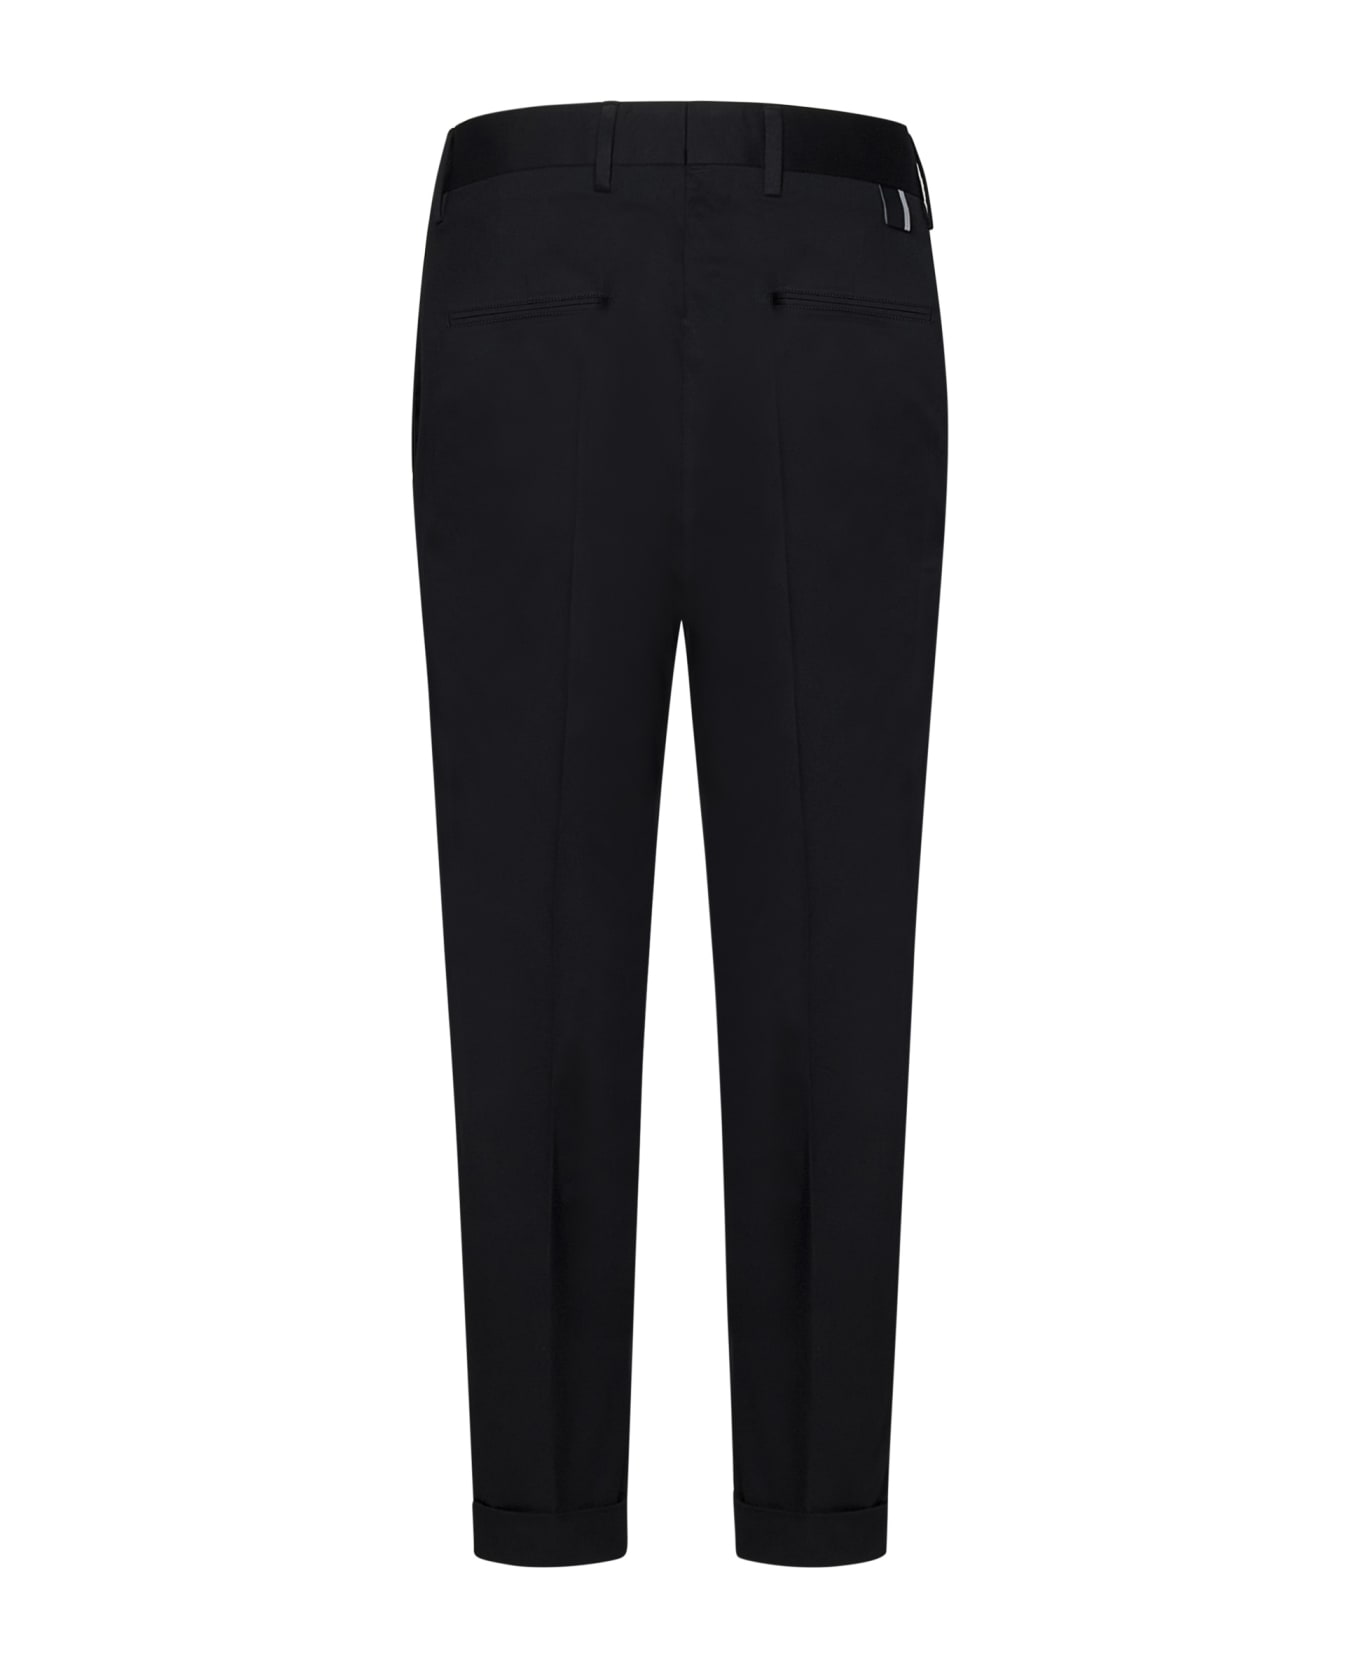 Low Brand Cooper T1.7 Trousers - Black ボトムス